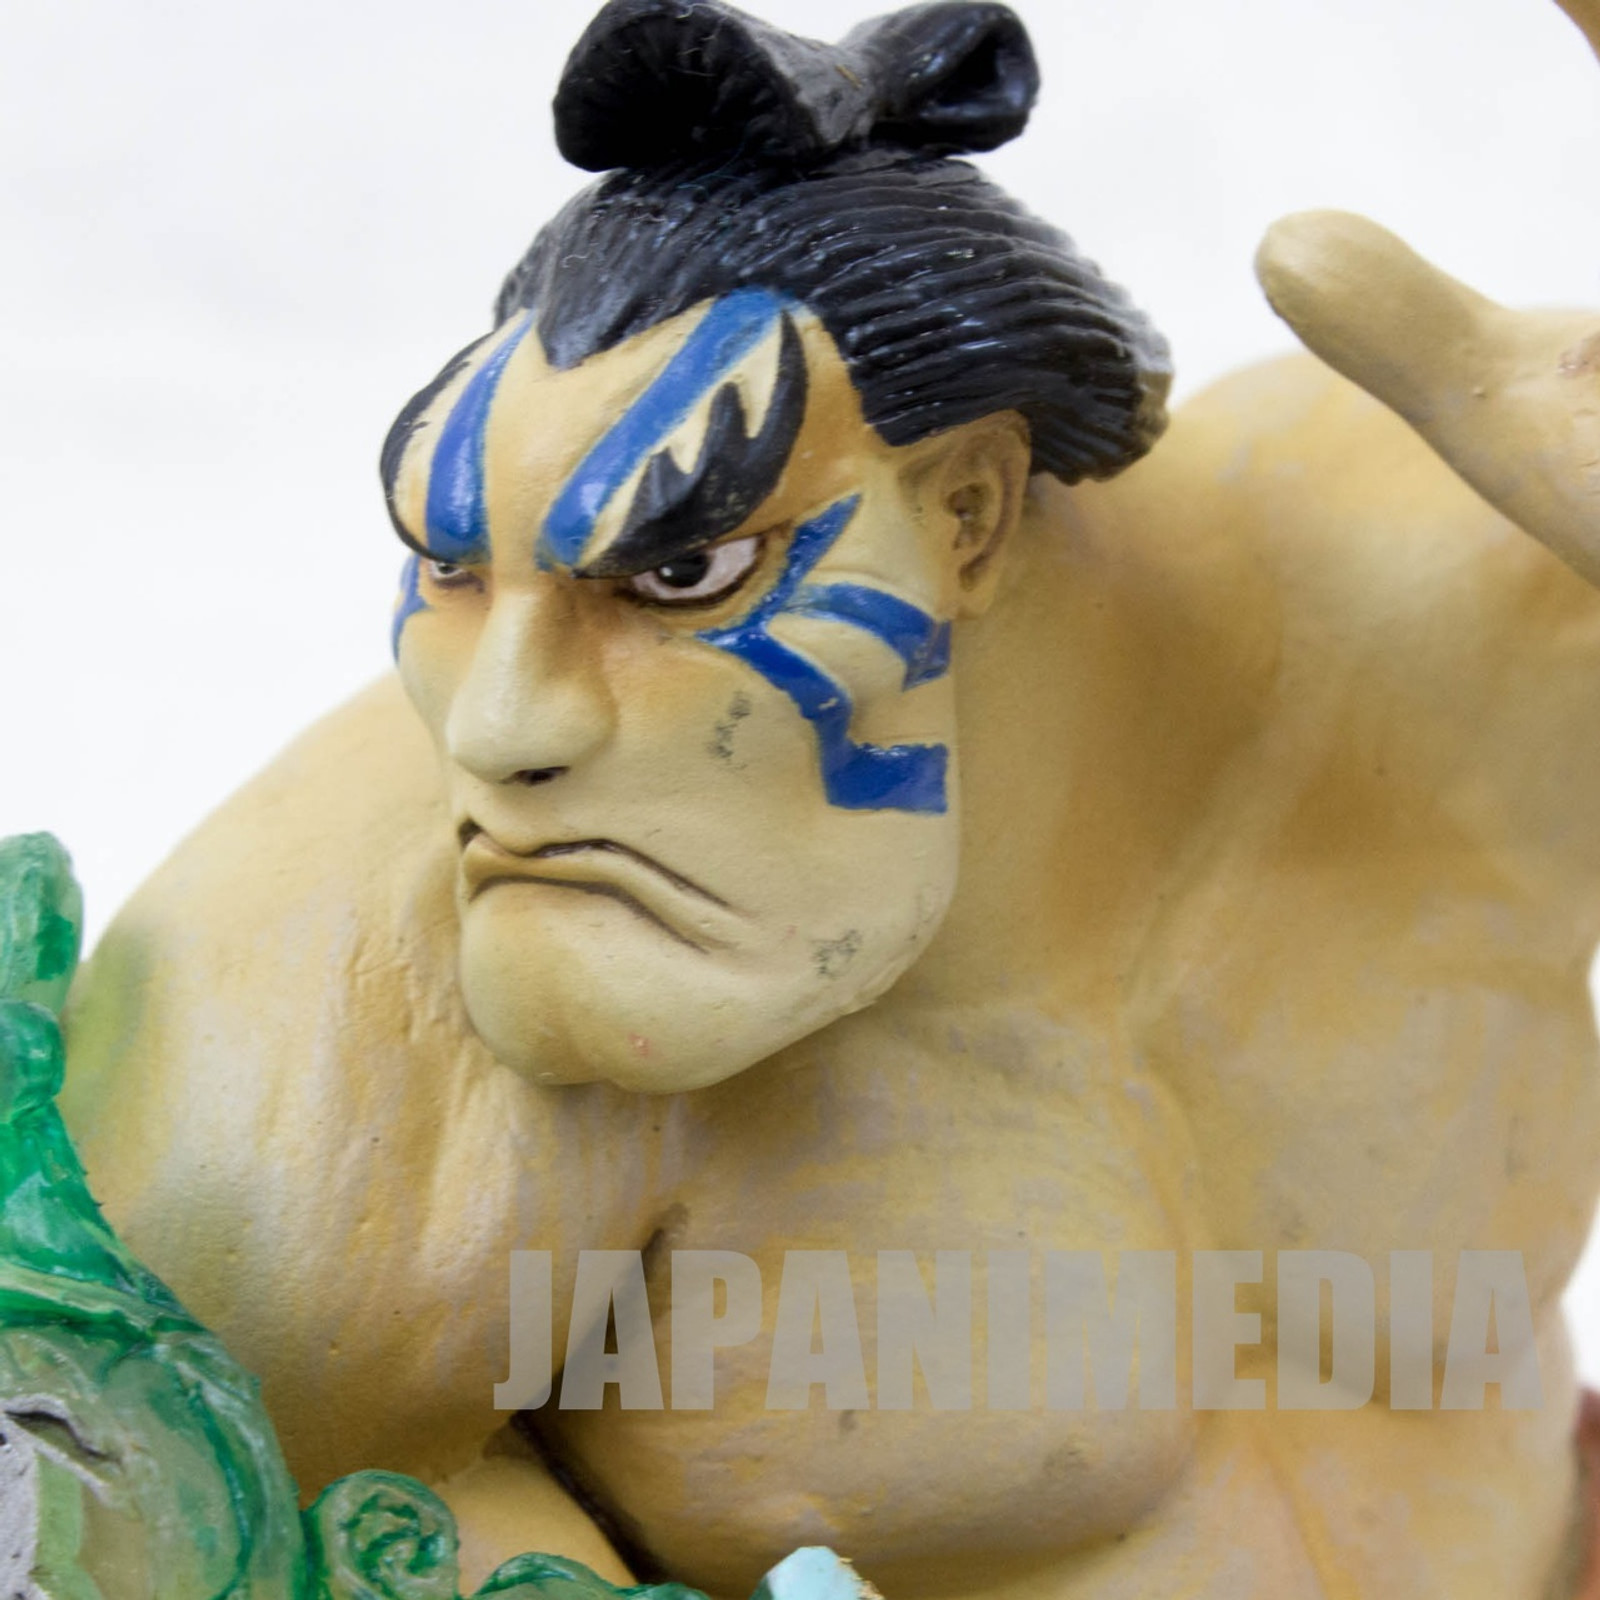 Street Fighter E. Honda Street Fighter Heroes Round1 Bust Figure (1P ver.) Capcom Character JAPAN GAME